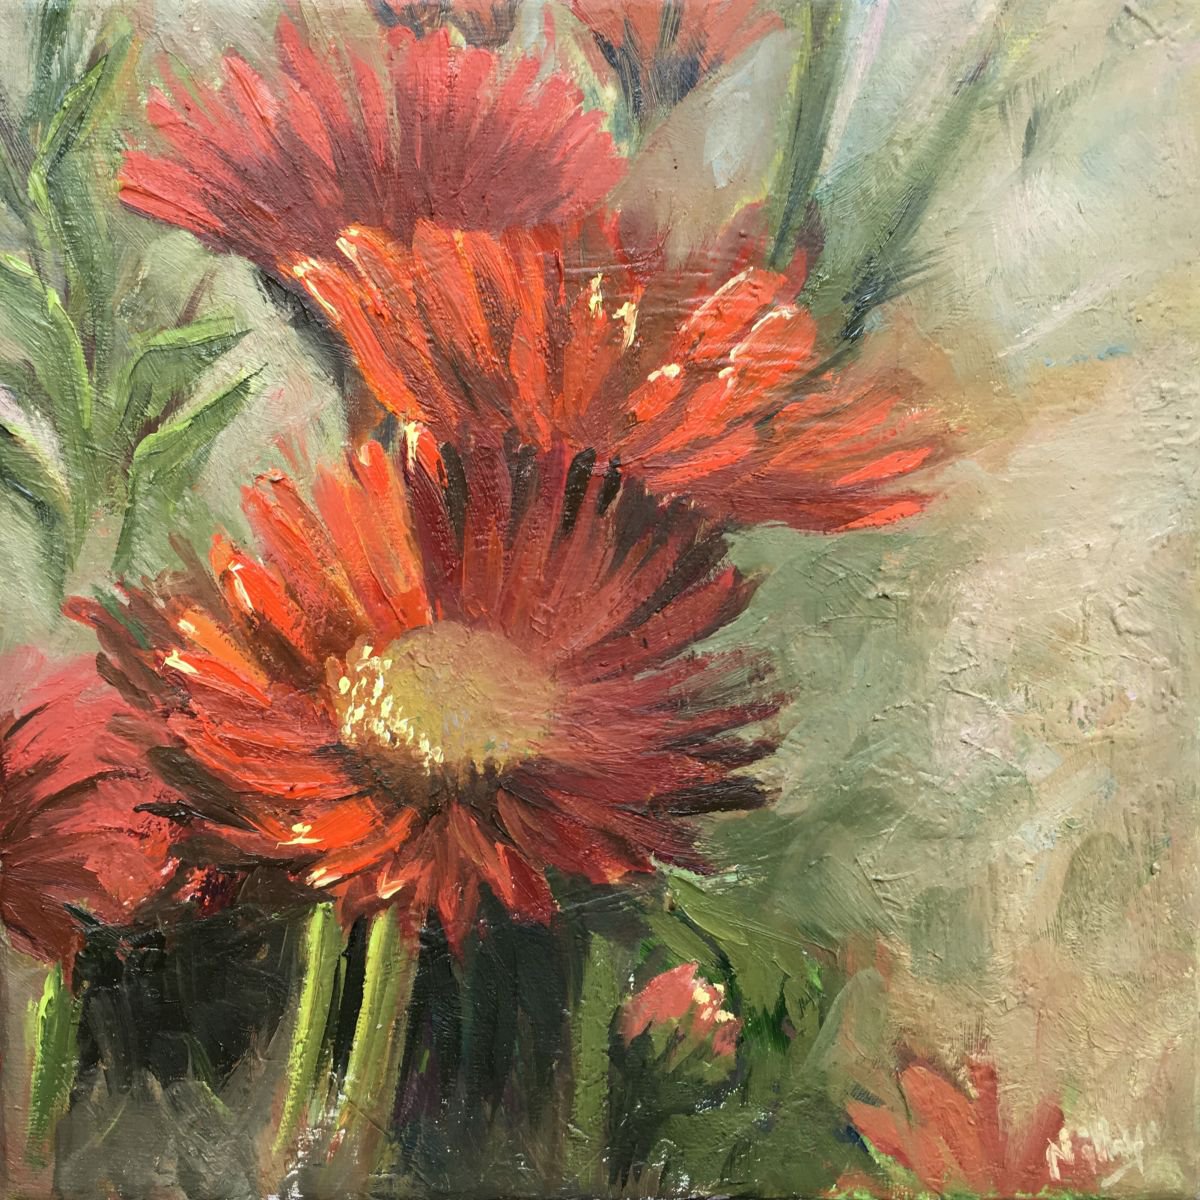 Spring Daisies - FRAMED Original Oil Painting of Red Flowers by Nithya Swaminathan